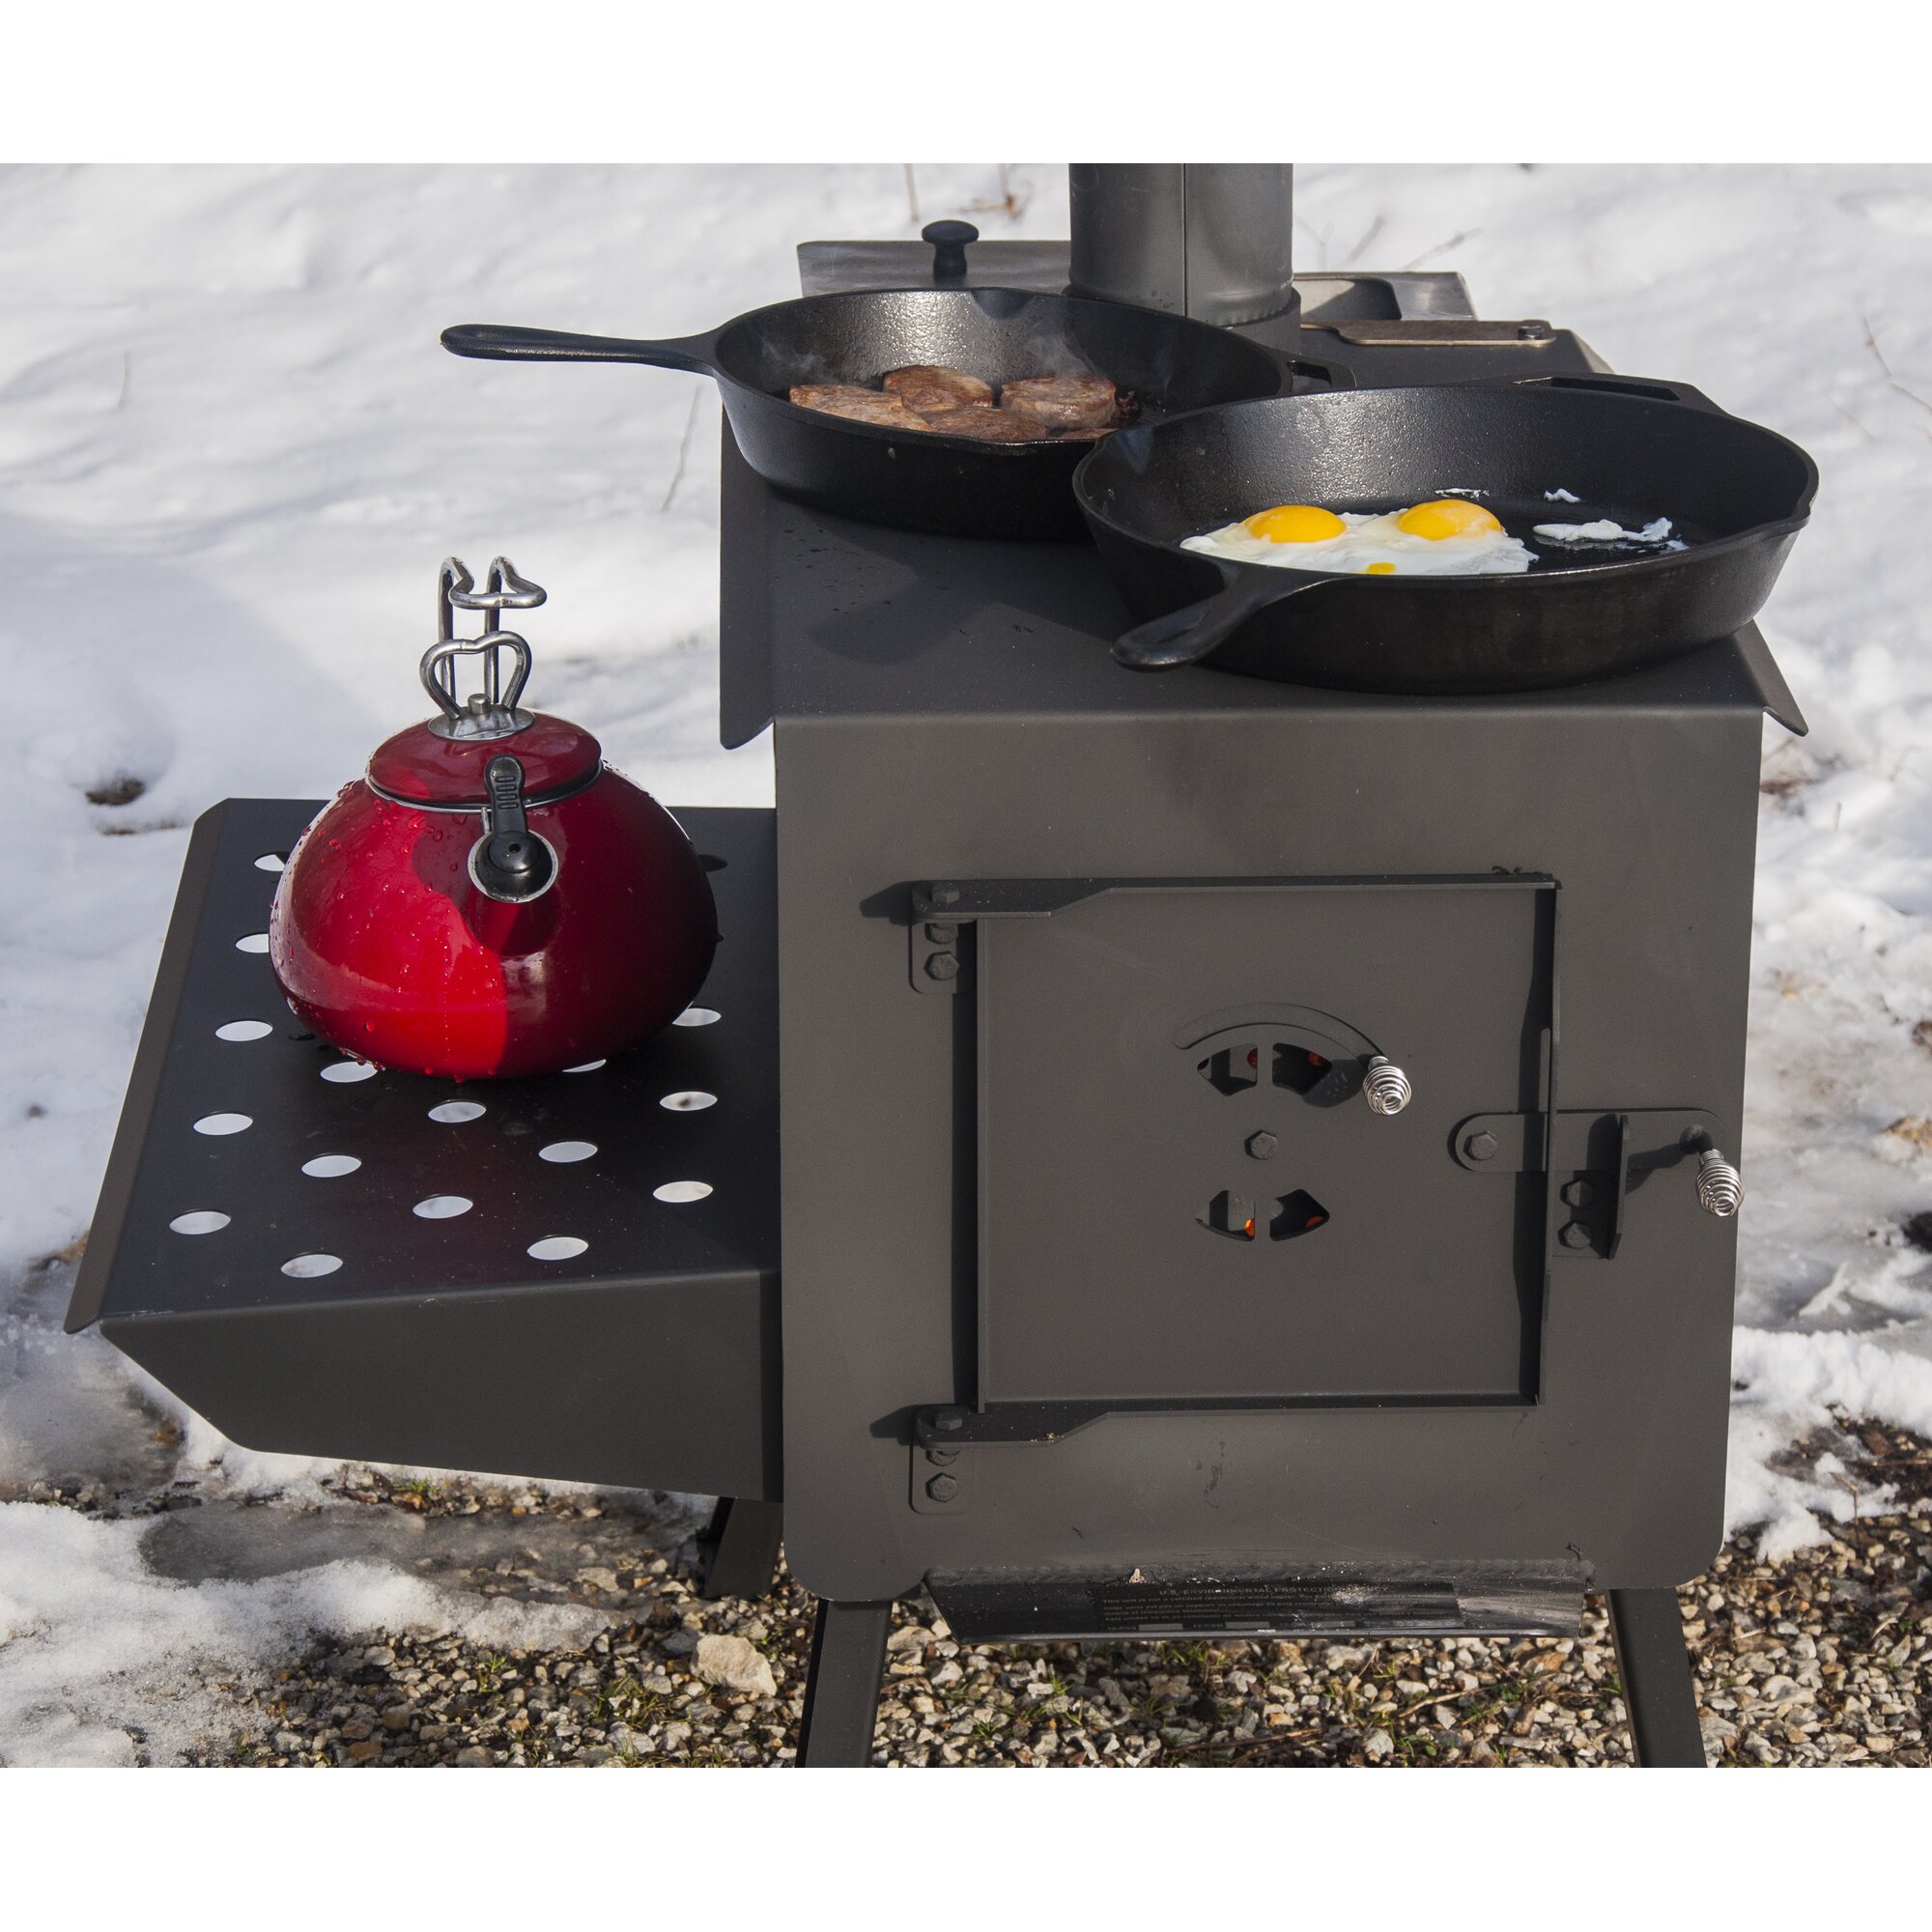 England's Stove Works Grizzly Portable Camp Wood Stove | Wayfair.ca